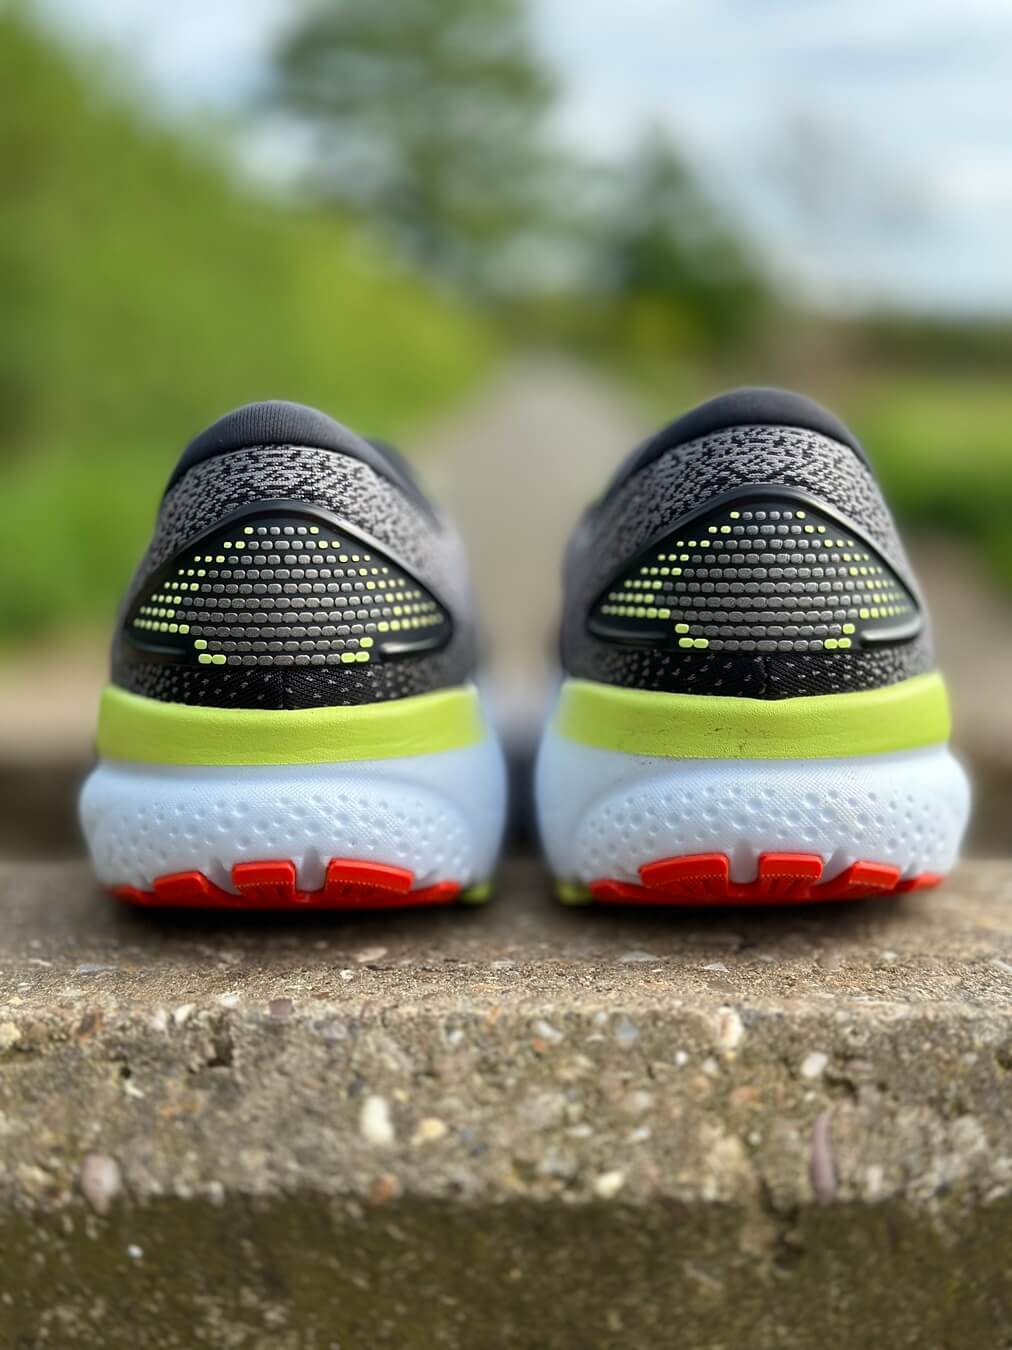 Heel/rear view of pair of running shoes sitting on a wall